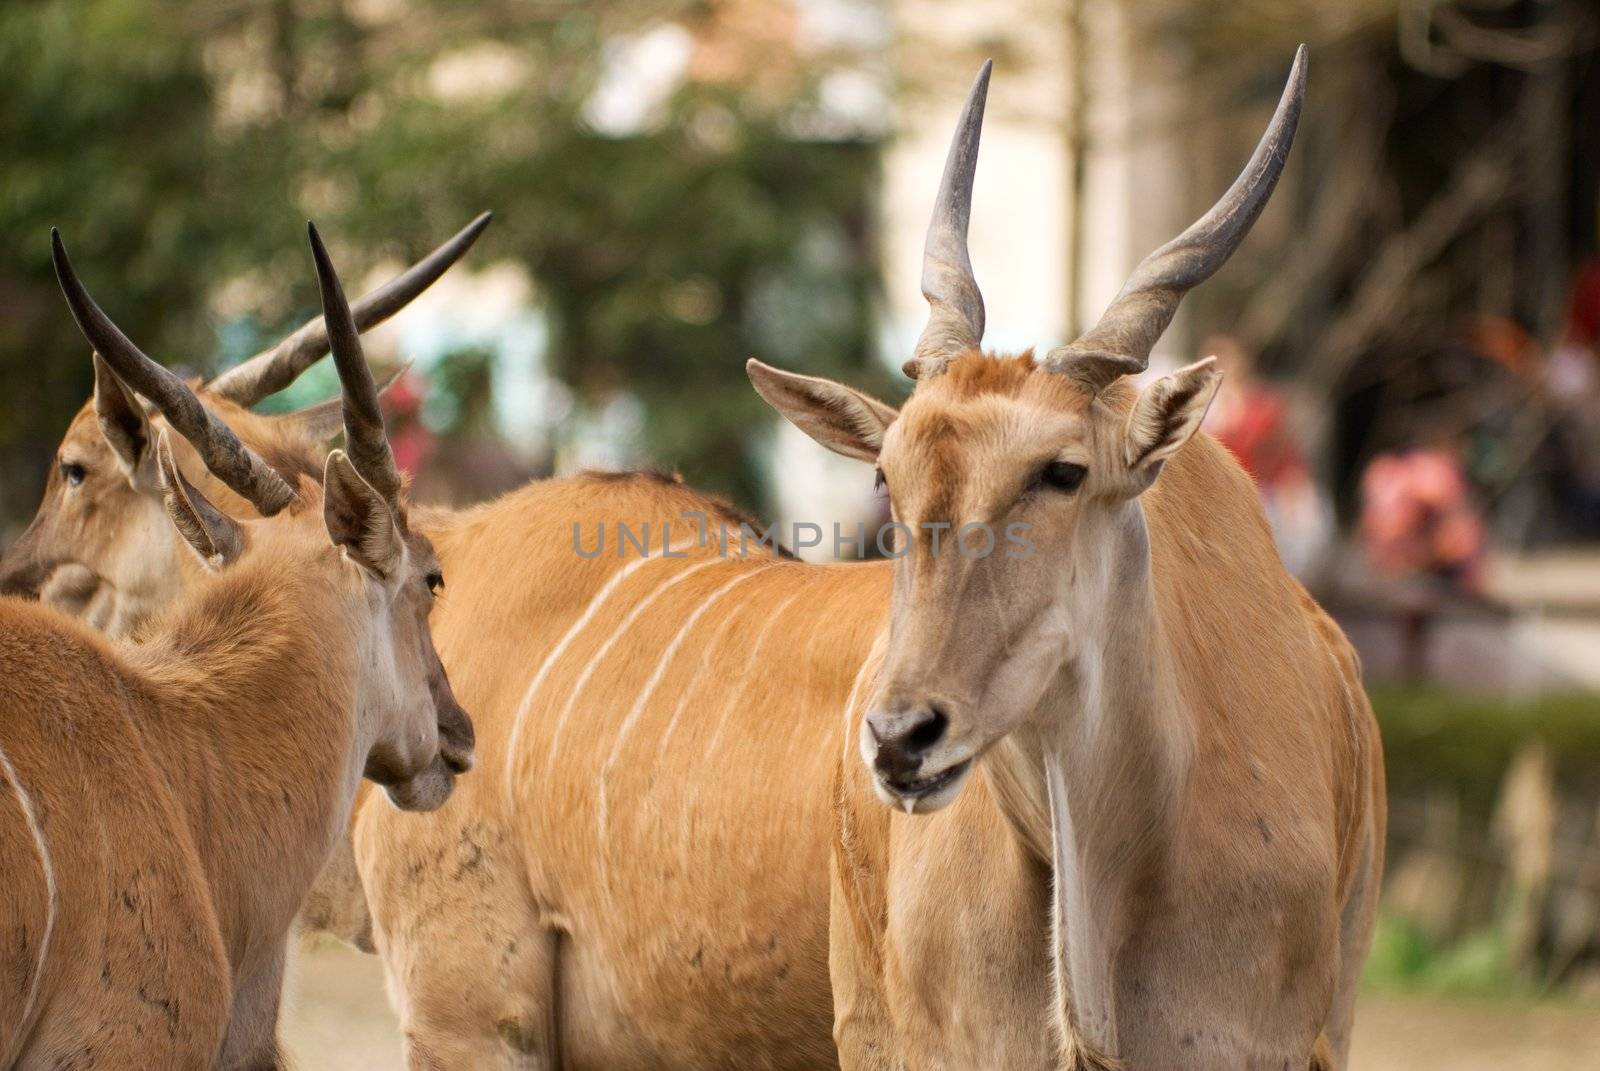 Common Eland is a kind of sheep in Africa, he was looking his partner and seemed so lovely and peace.